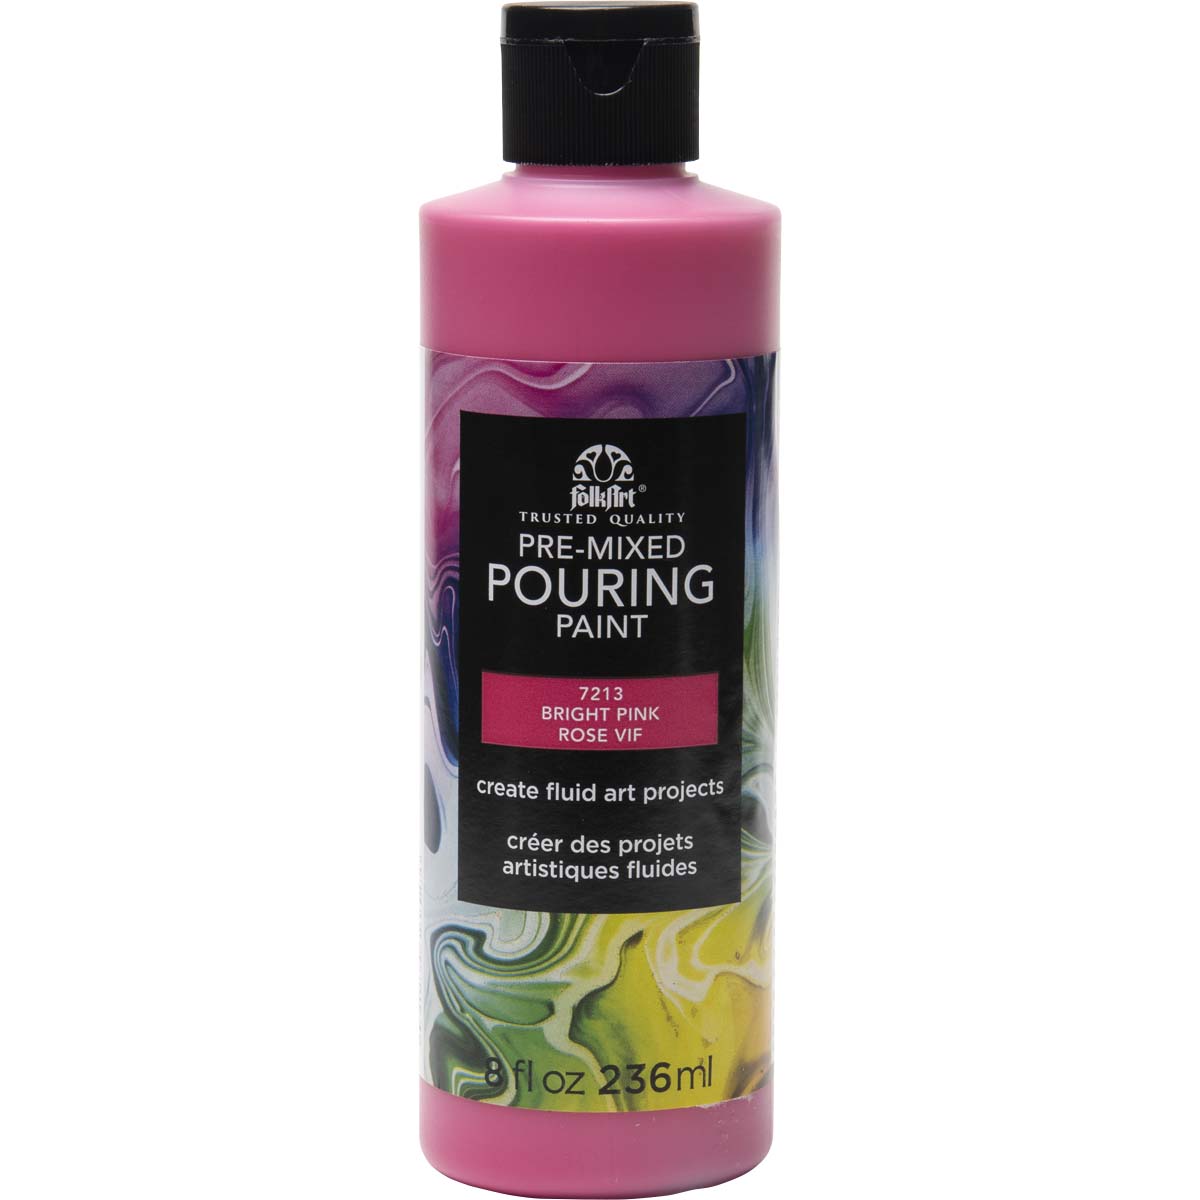 FolkArt ® Pre-mixed Pouring Paint - Bright Pink, 8 oz. - 7213